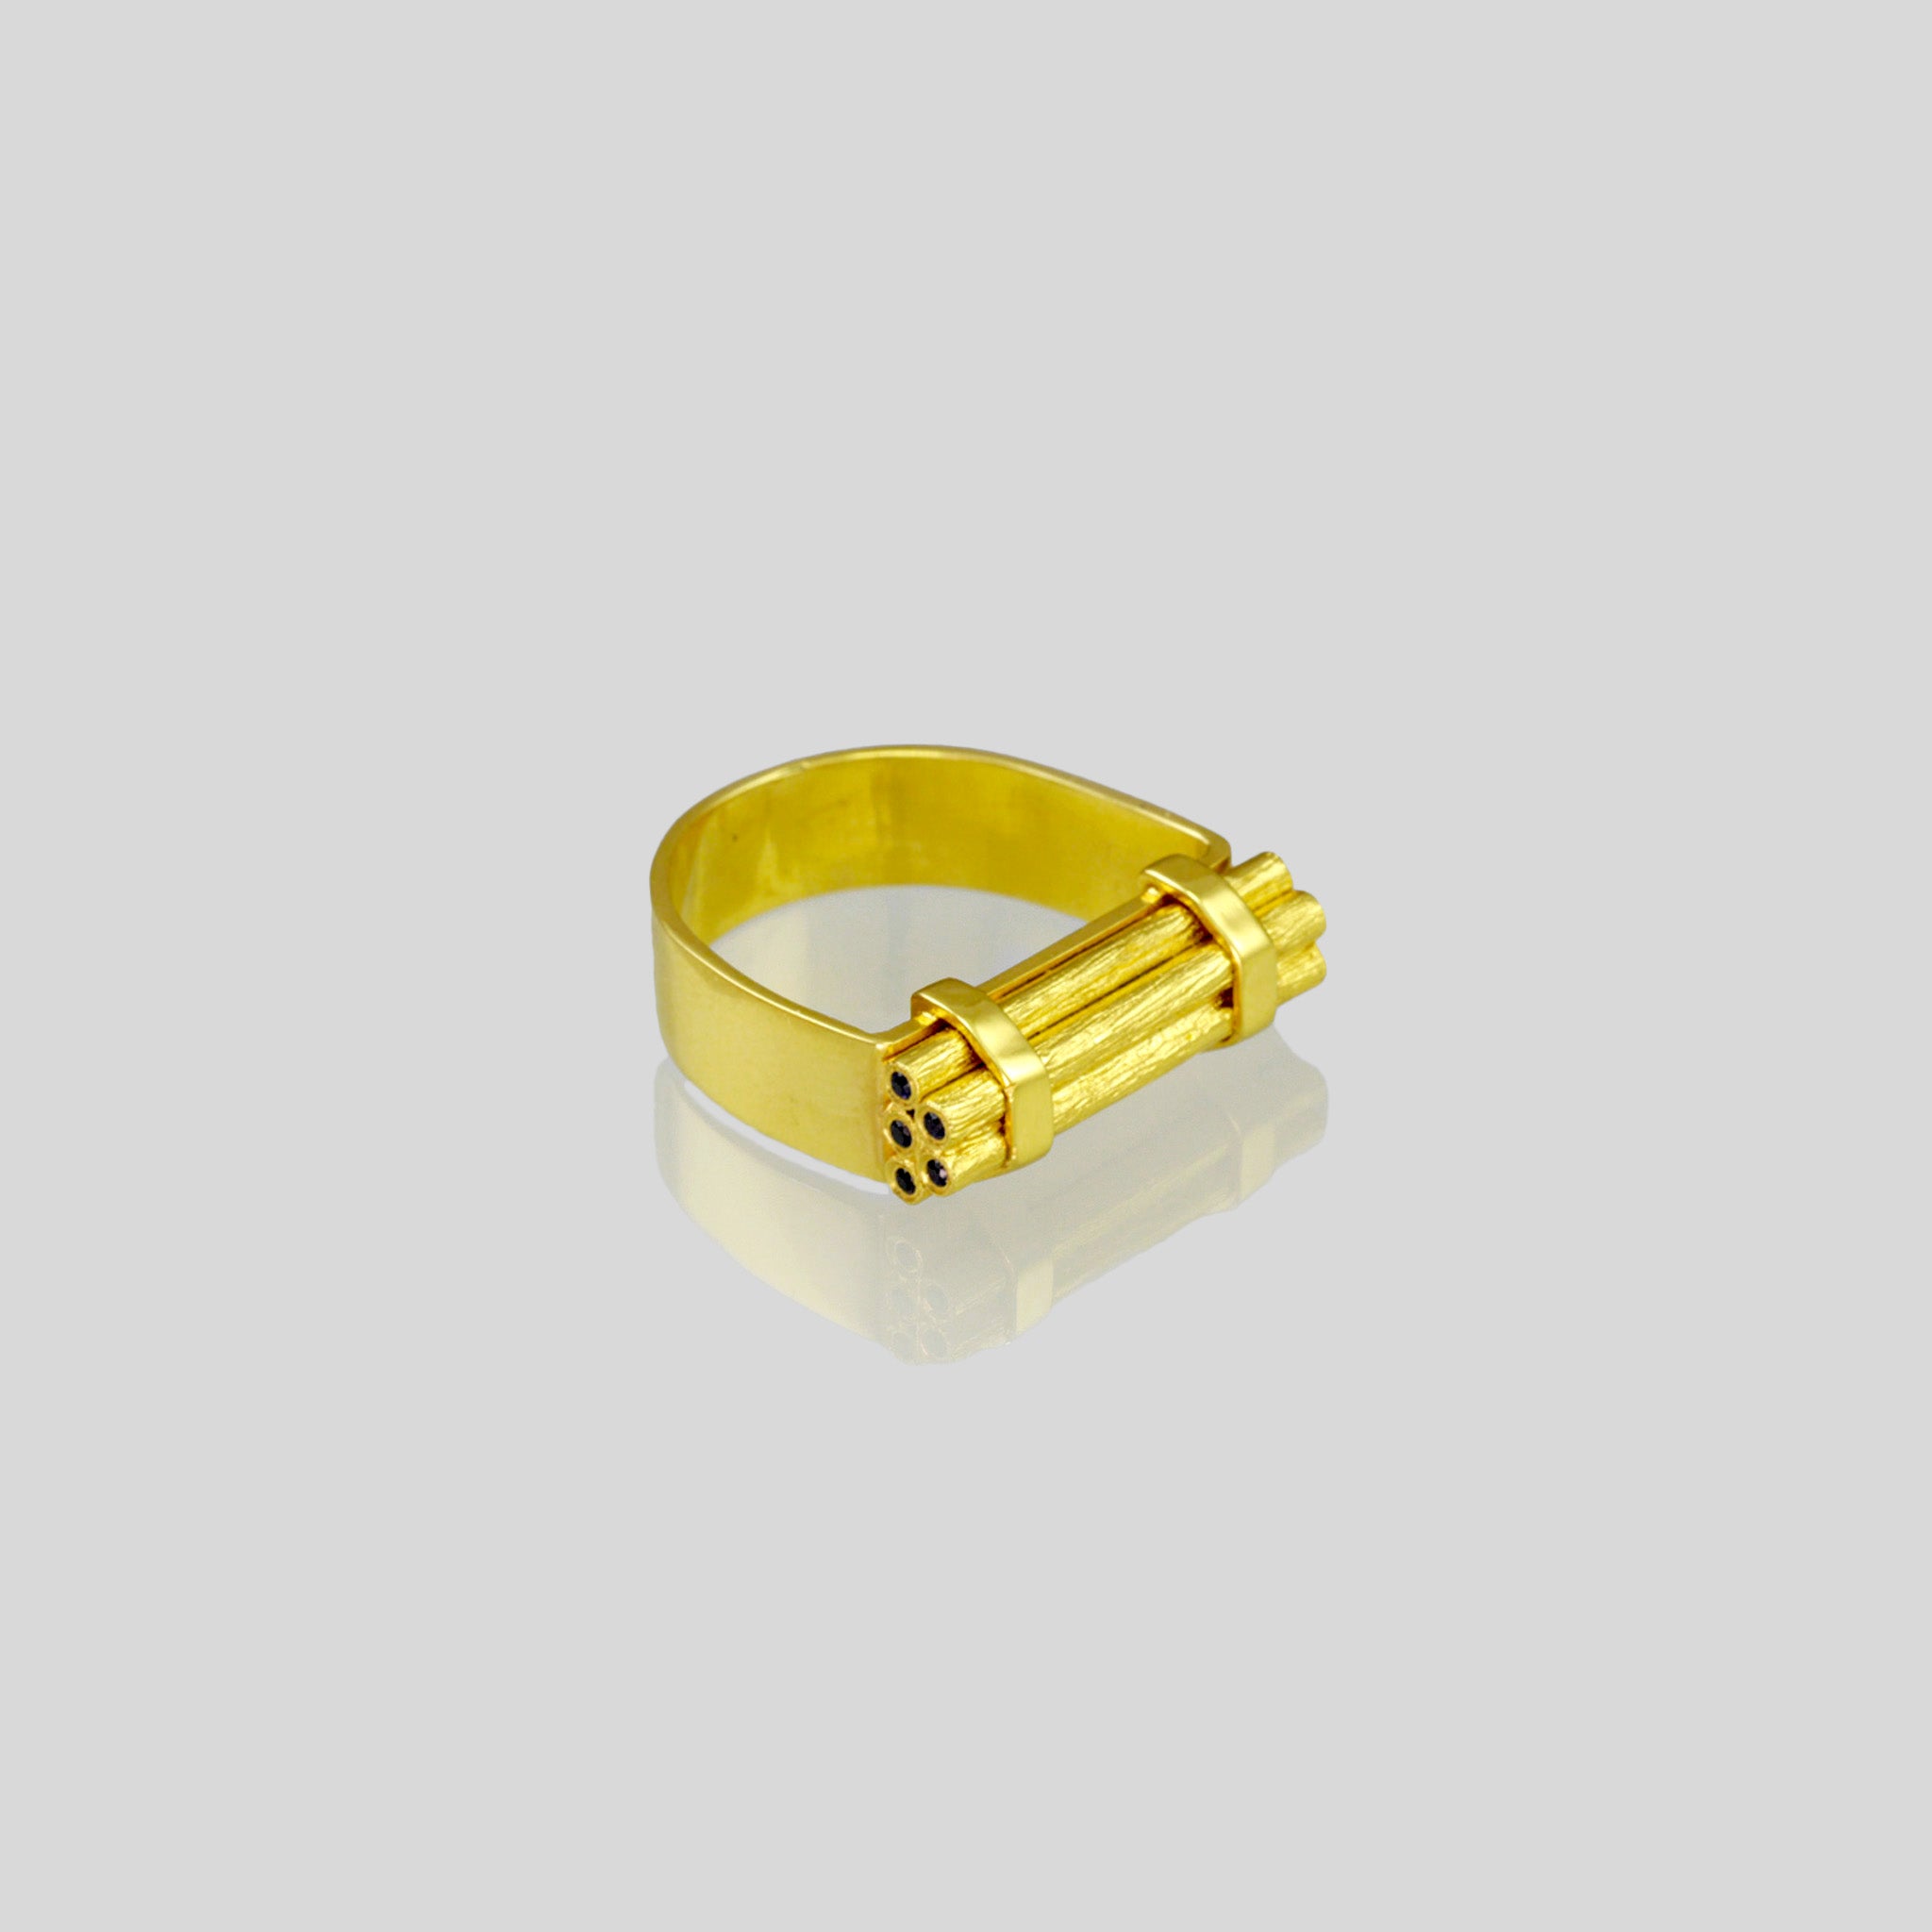 Handcrafted gold ring with stacked wood-inspired design, adorned with sparkling Sapphires for added color and radiance. Contemporary and comfortable statement piece.